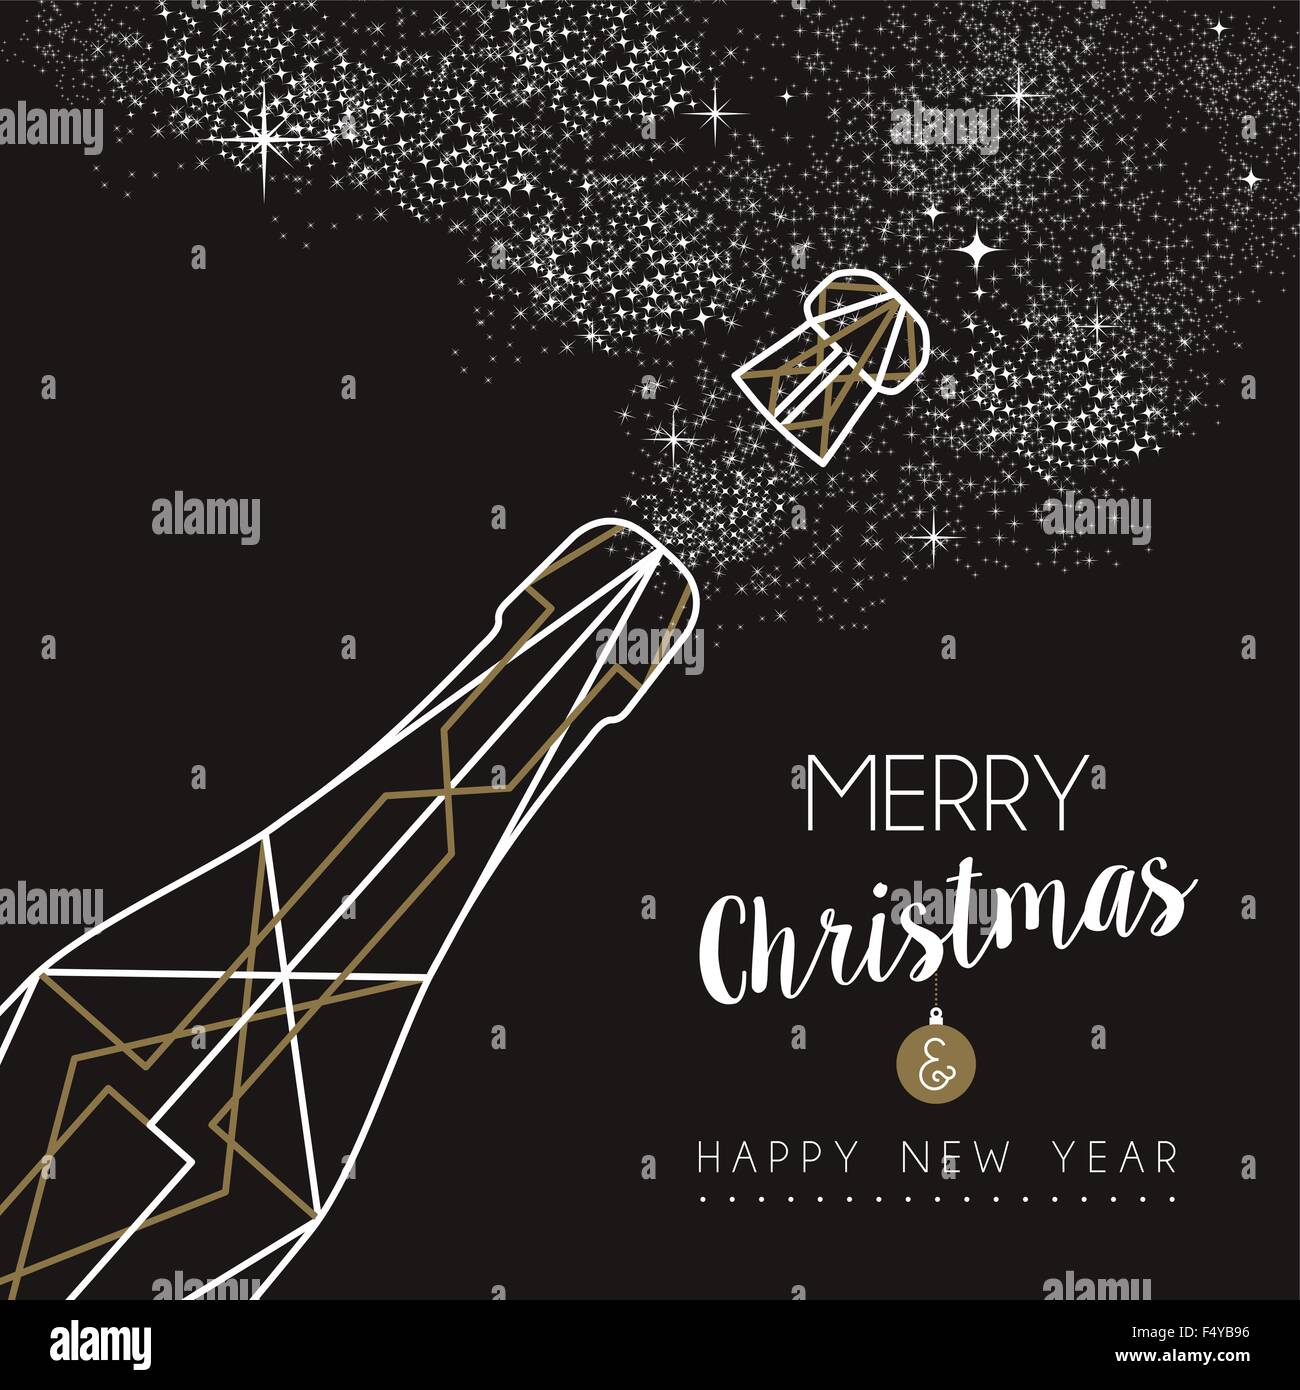 Merry christmas happy new year champagne bottle design in art deco outline style Ideal for